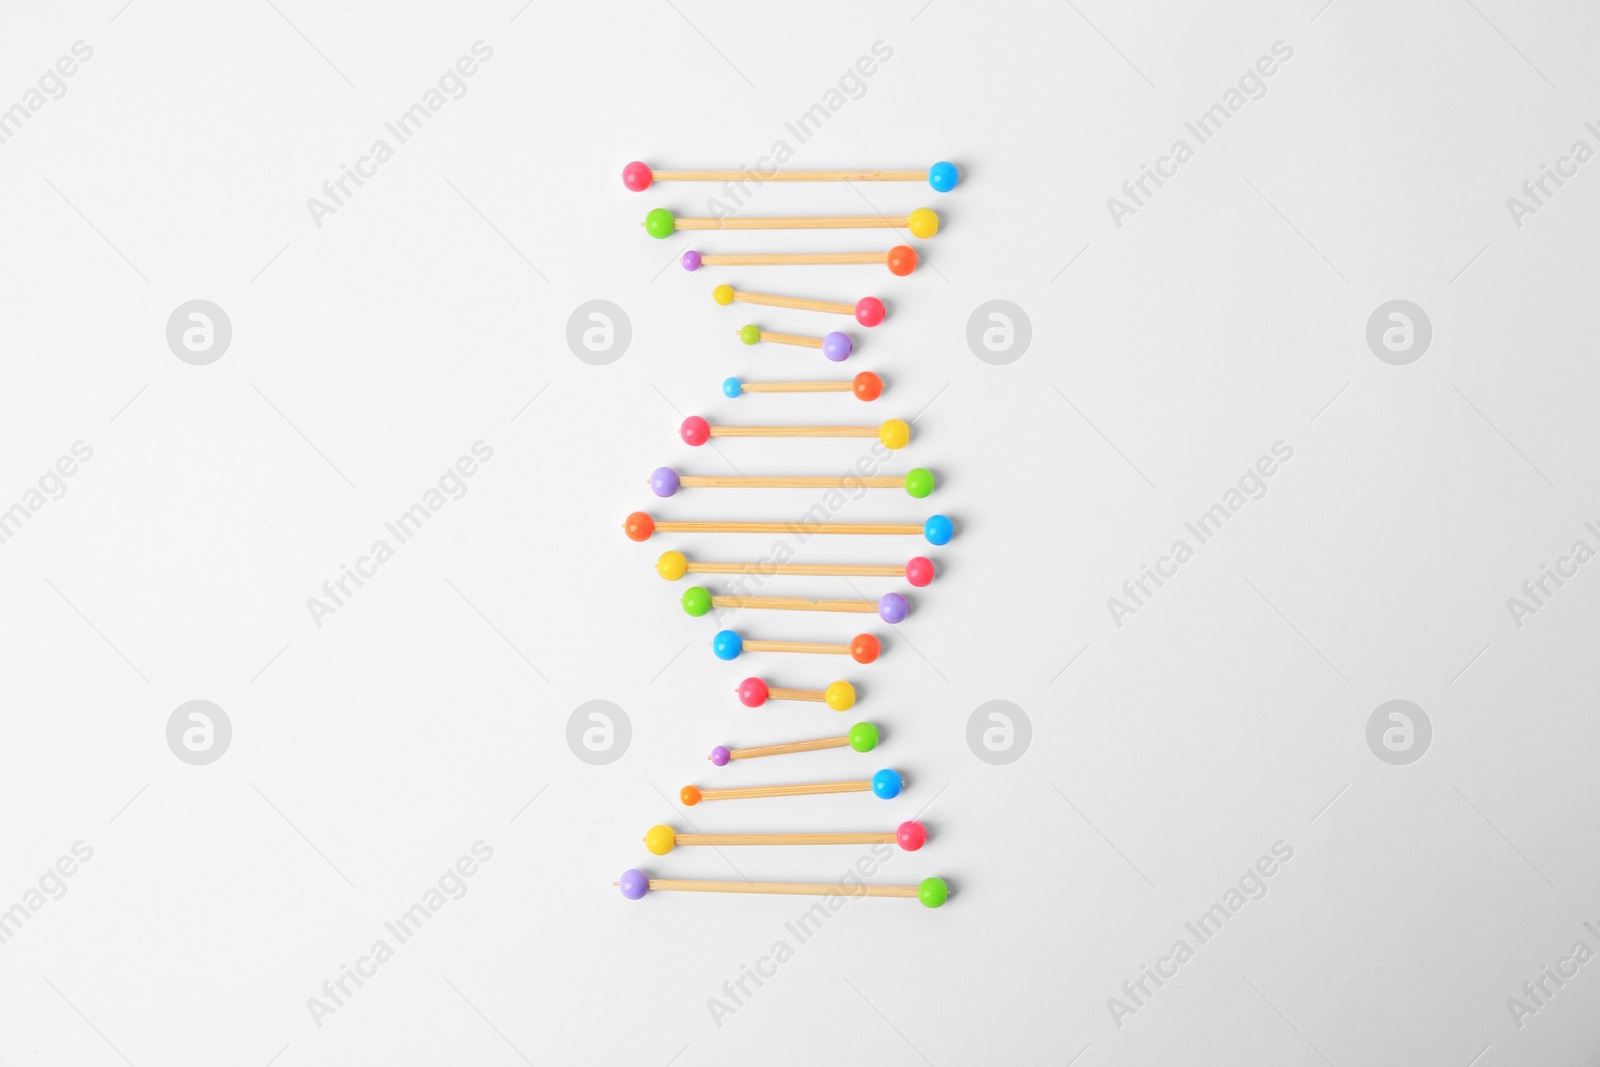 Photo of DNA molecule model made of toothpick and colorful beads on white background, flat lay